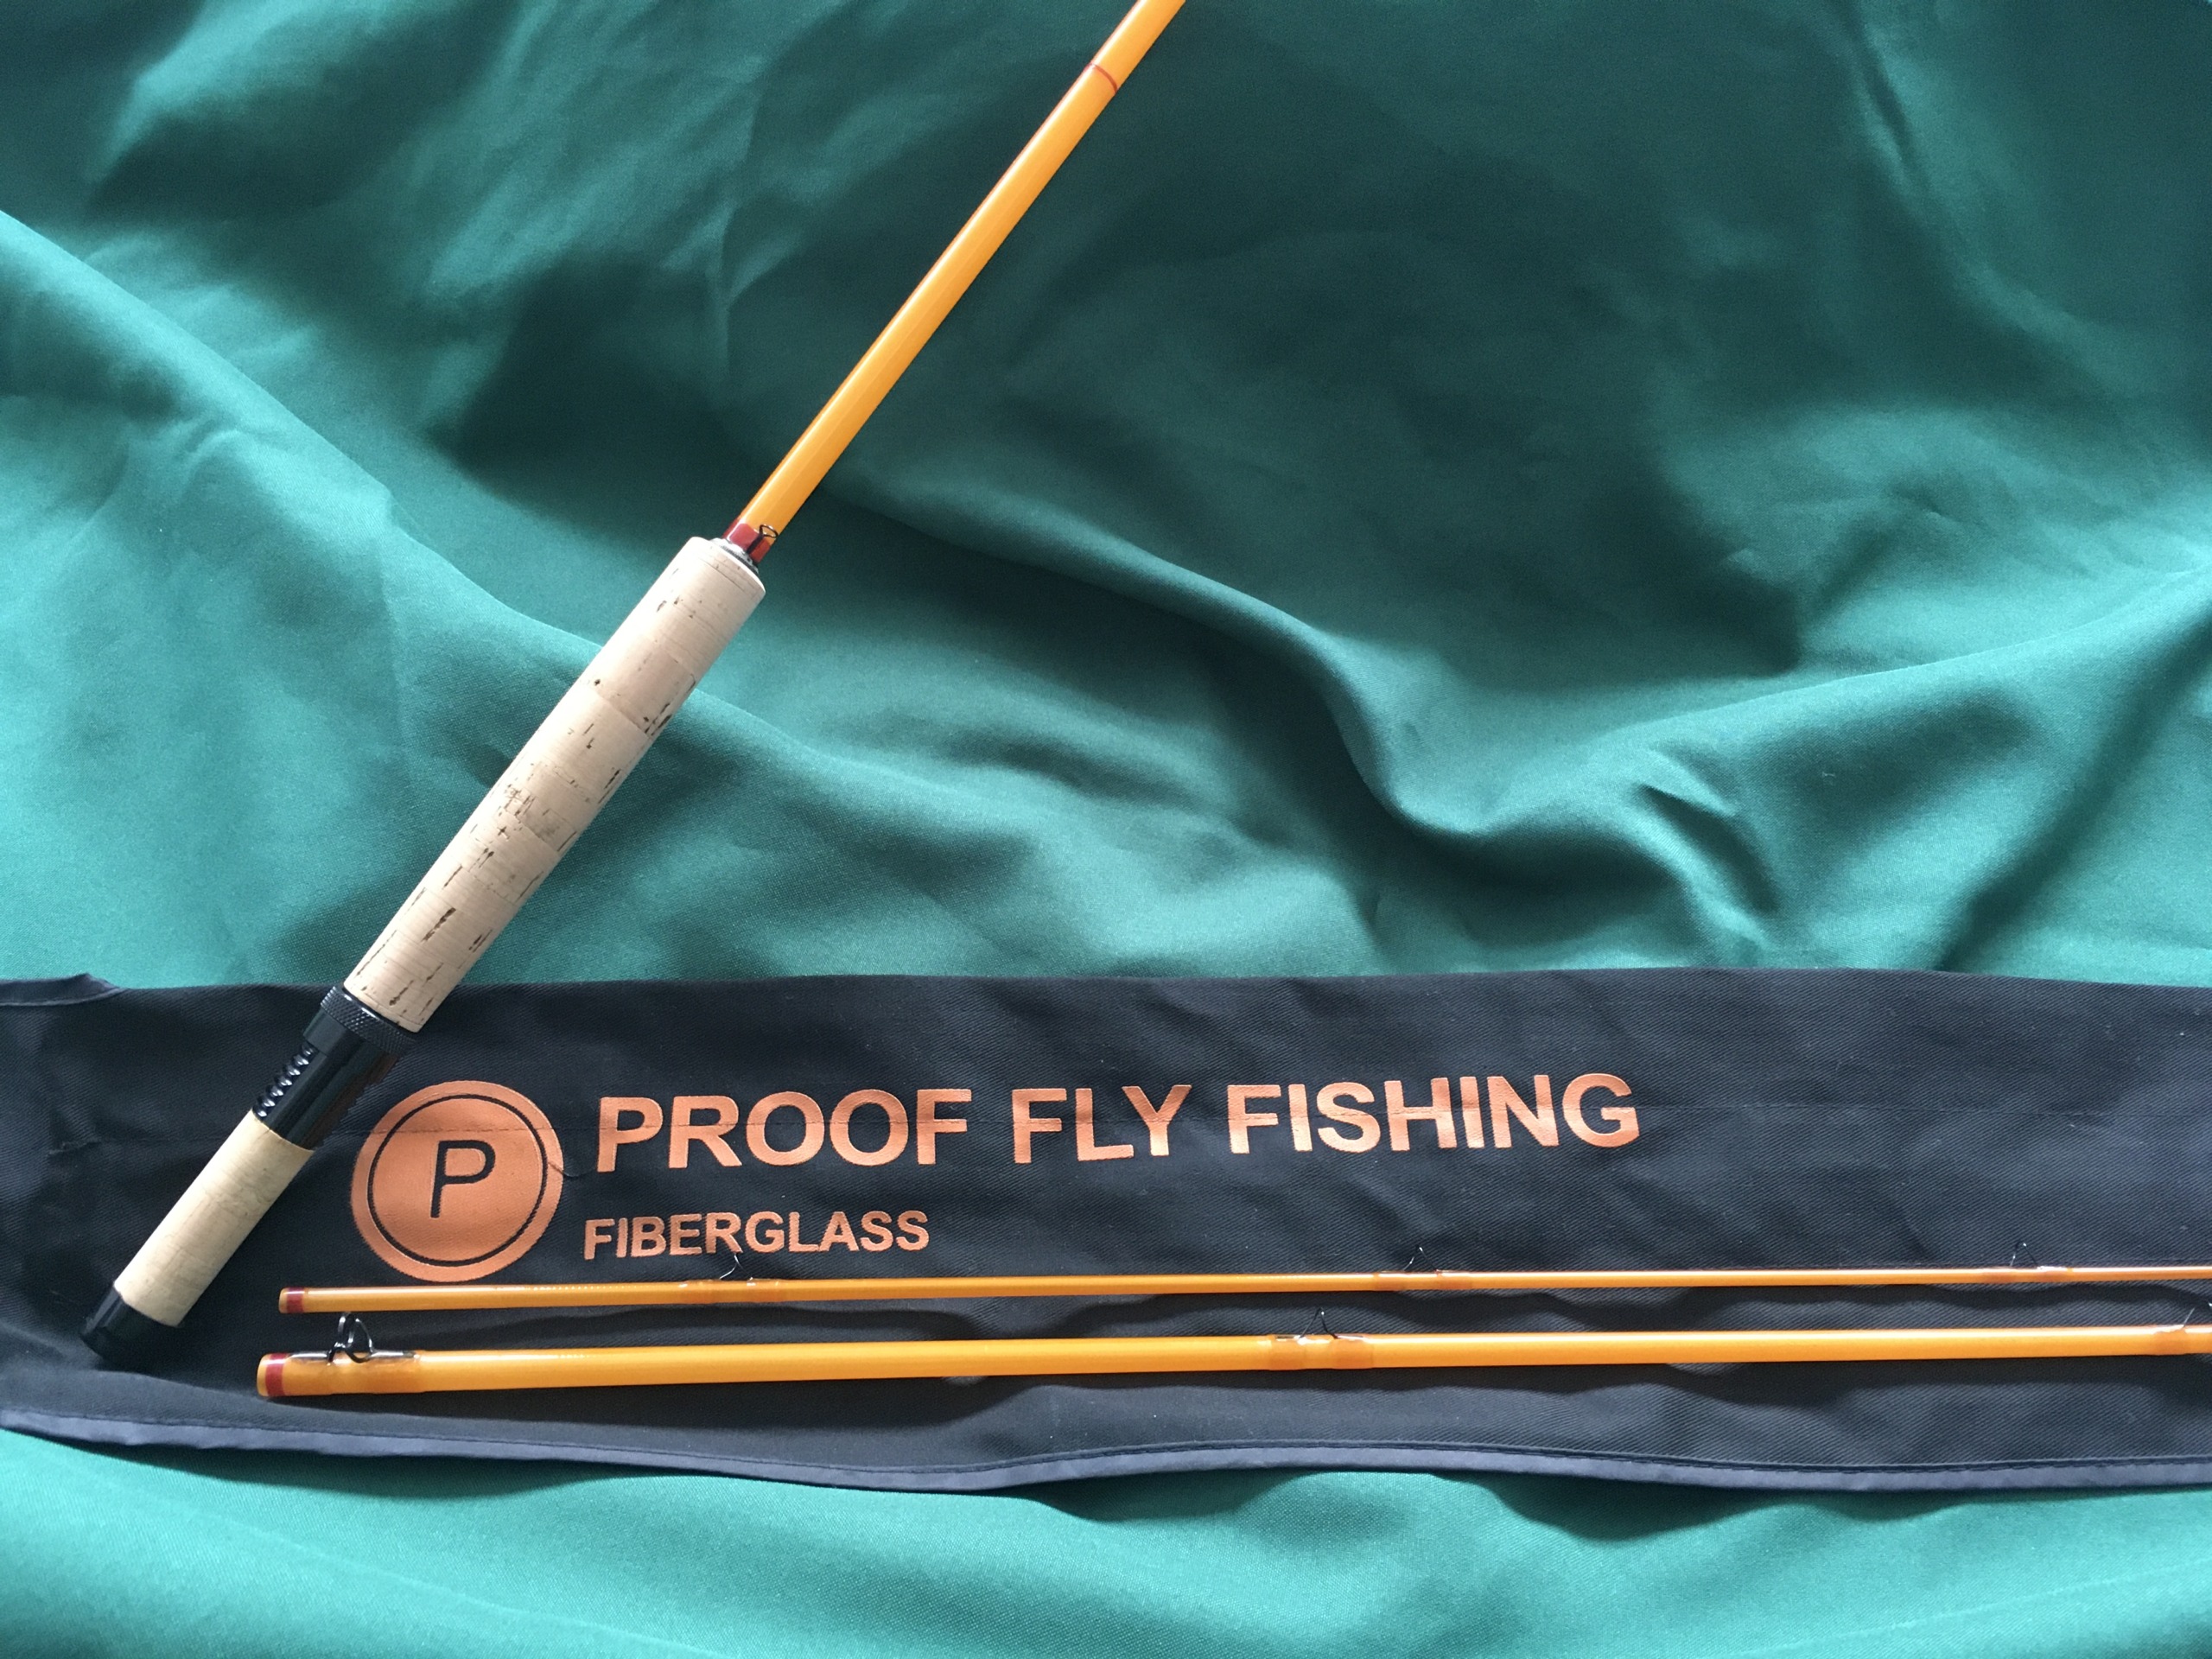 https://thefirstcast.ca/wp-content/uploads/2022/02/New-Proof-Fly-Fishing-7-12-ft-5-wt-3-pc-scaled.jpeg